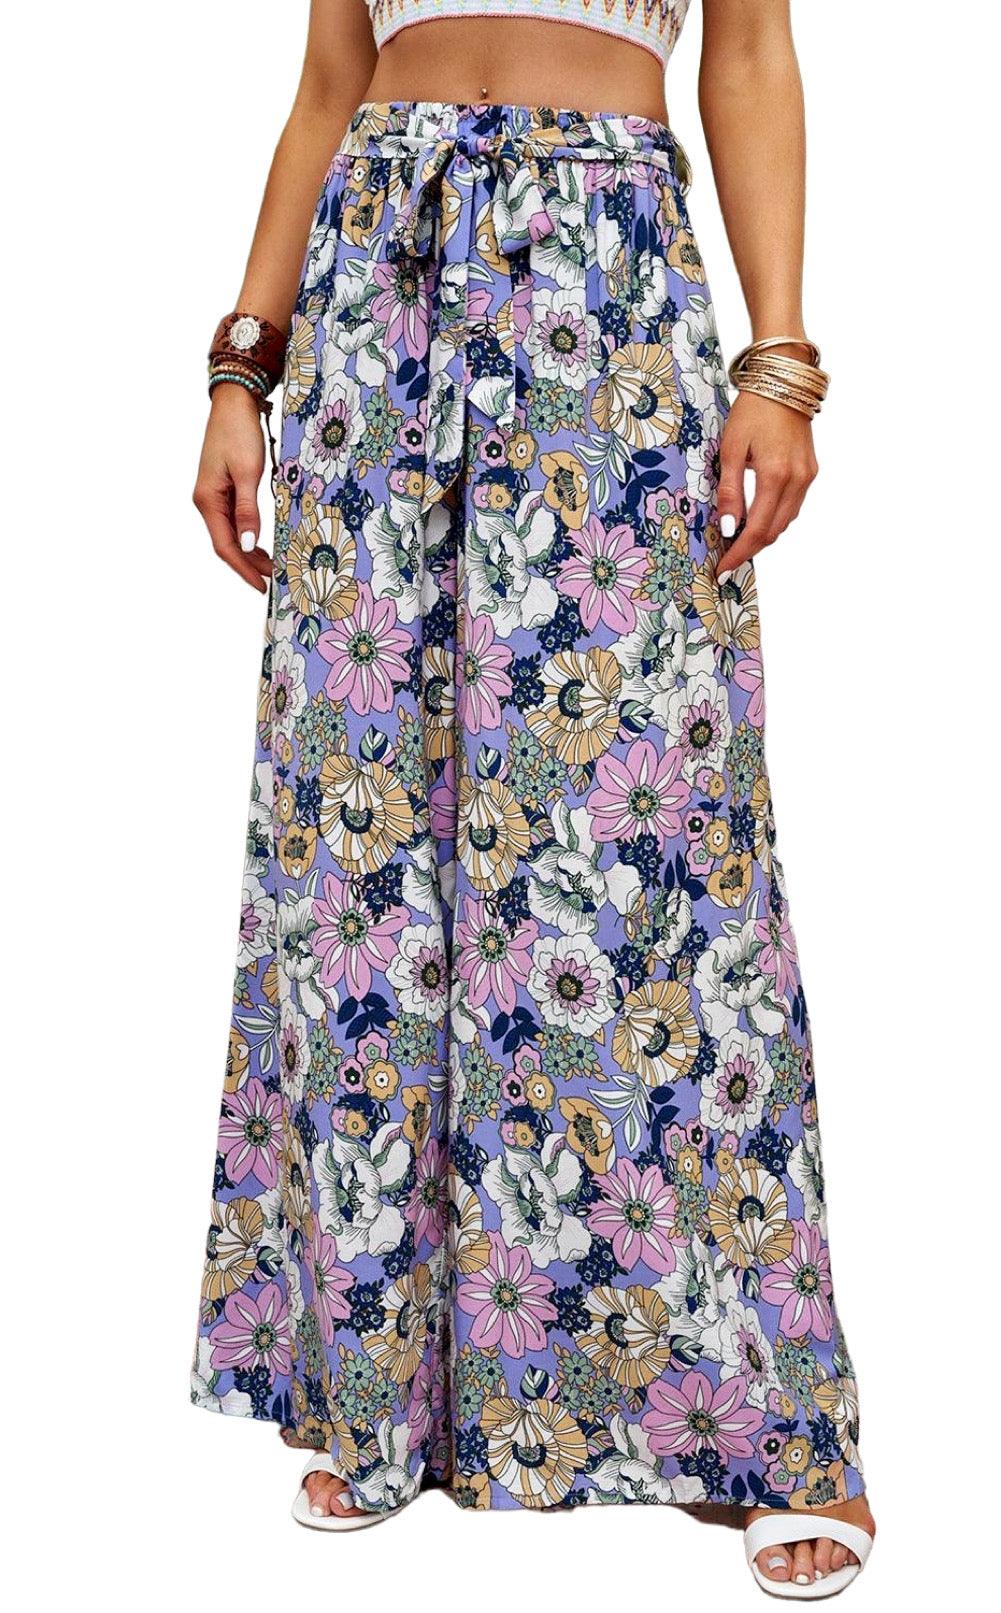 How to Style Floral Tie Belt Wide Leg Pants for Springtime - Jewelry Bubble